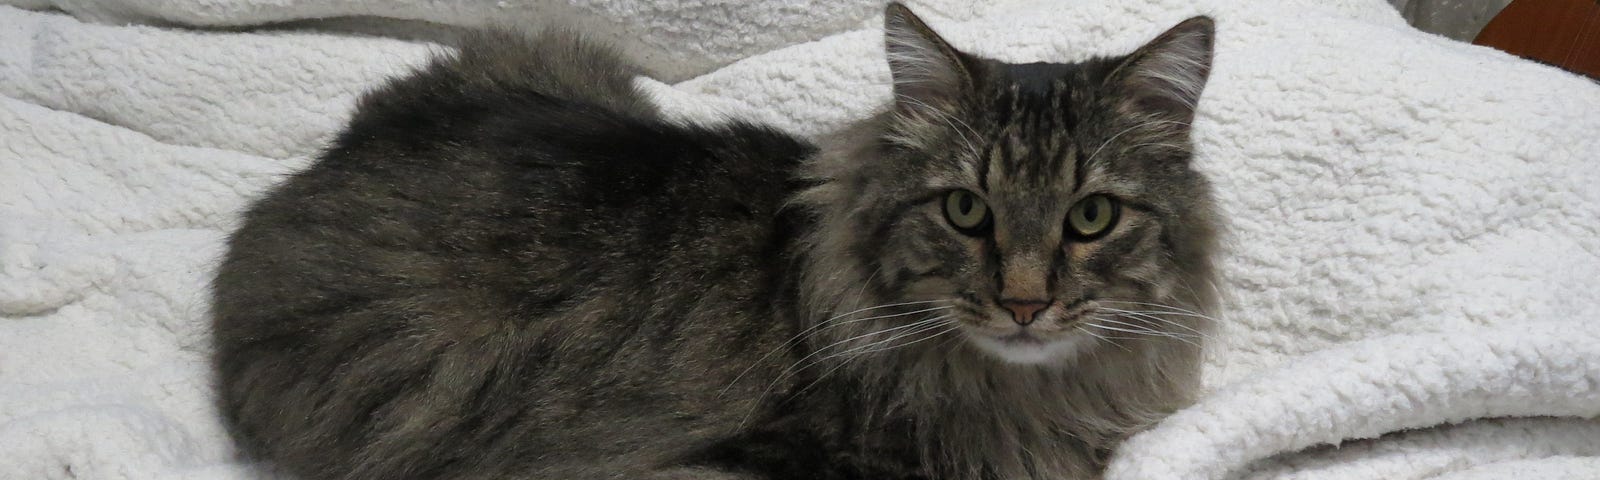 A maine coon sits with his paws tucked under him, on a fuzzy white blanket. He looks at the camera with yellow eyes and very long whiskers. There’s an uncanny spark of intelligence about him.